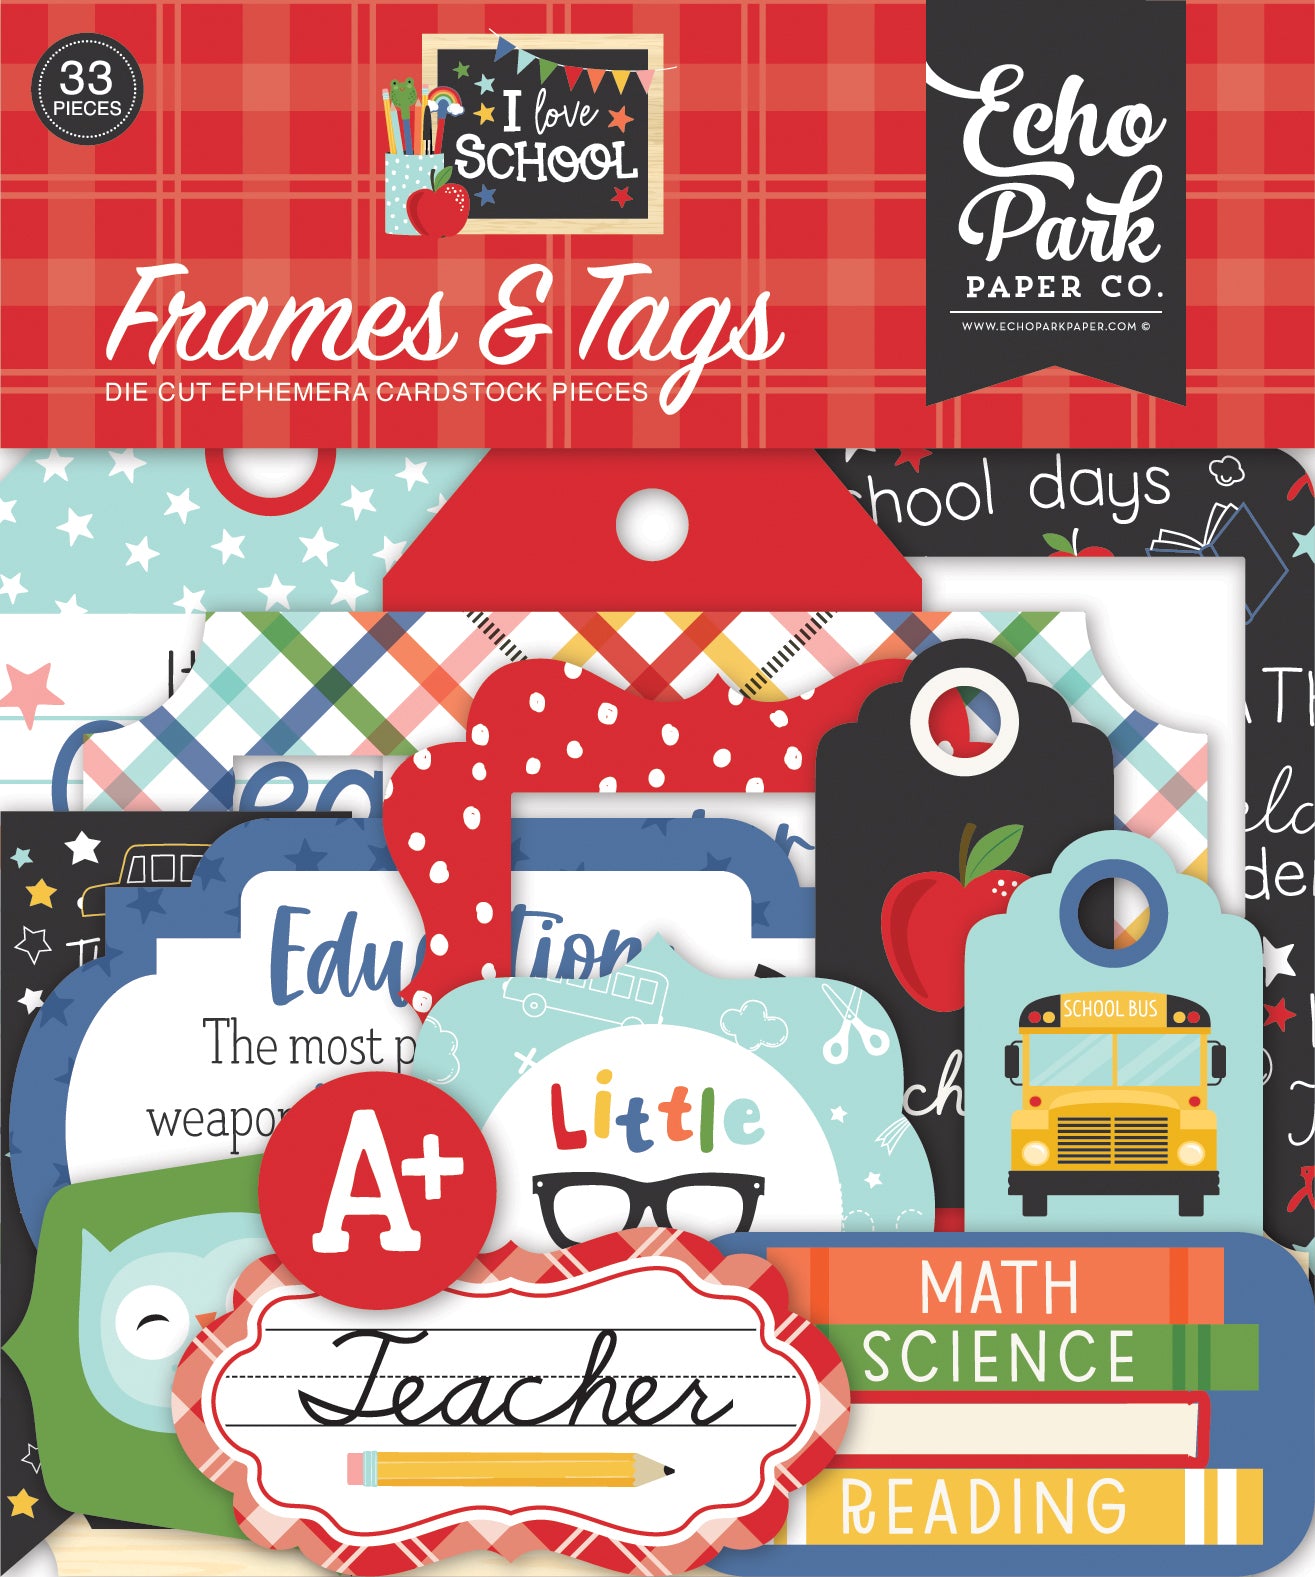 I Love School Frames & Tags Die Cut Cardstock Pack.  Pack includes 33 different die-cut shapes ready to embellish any project.